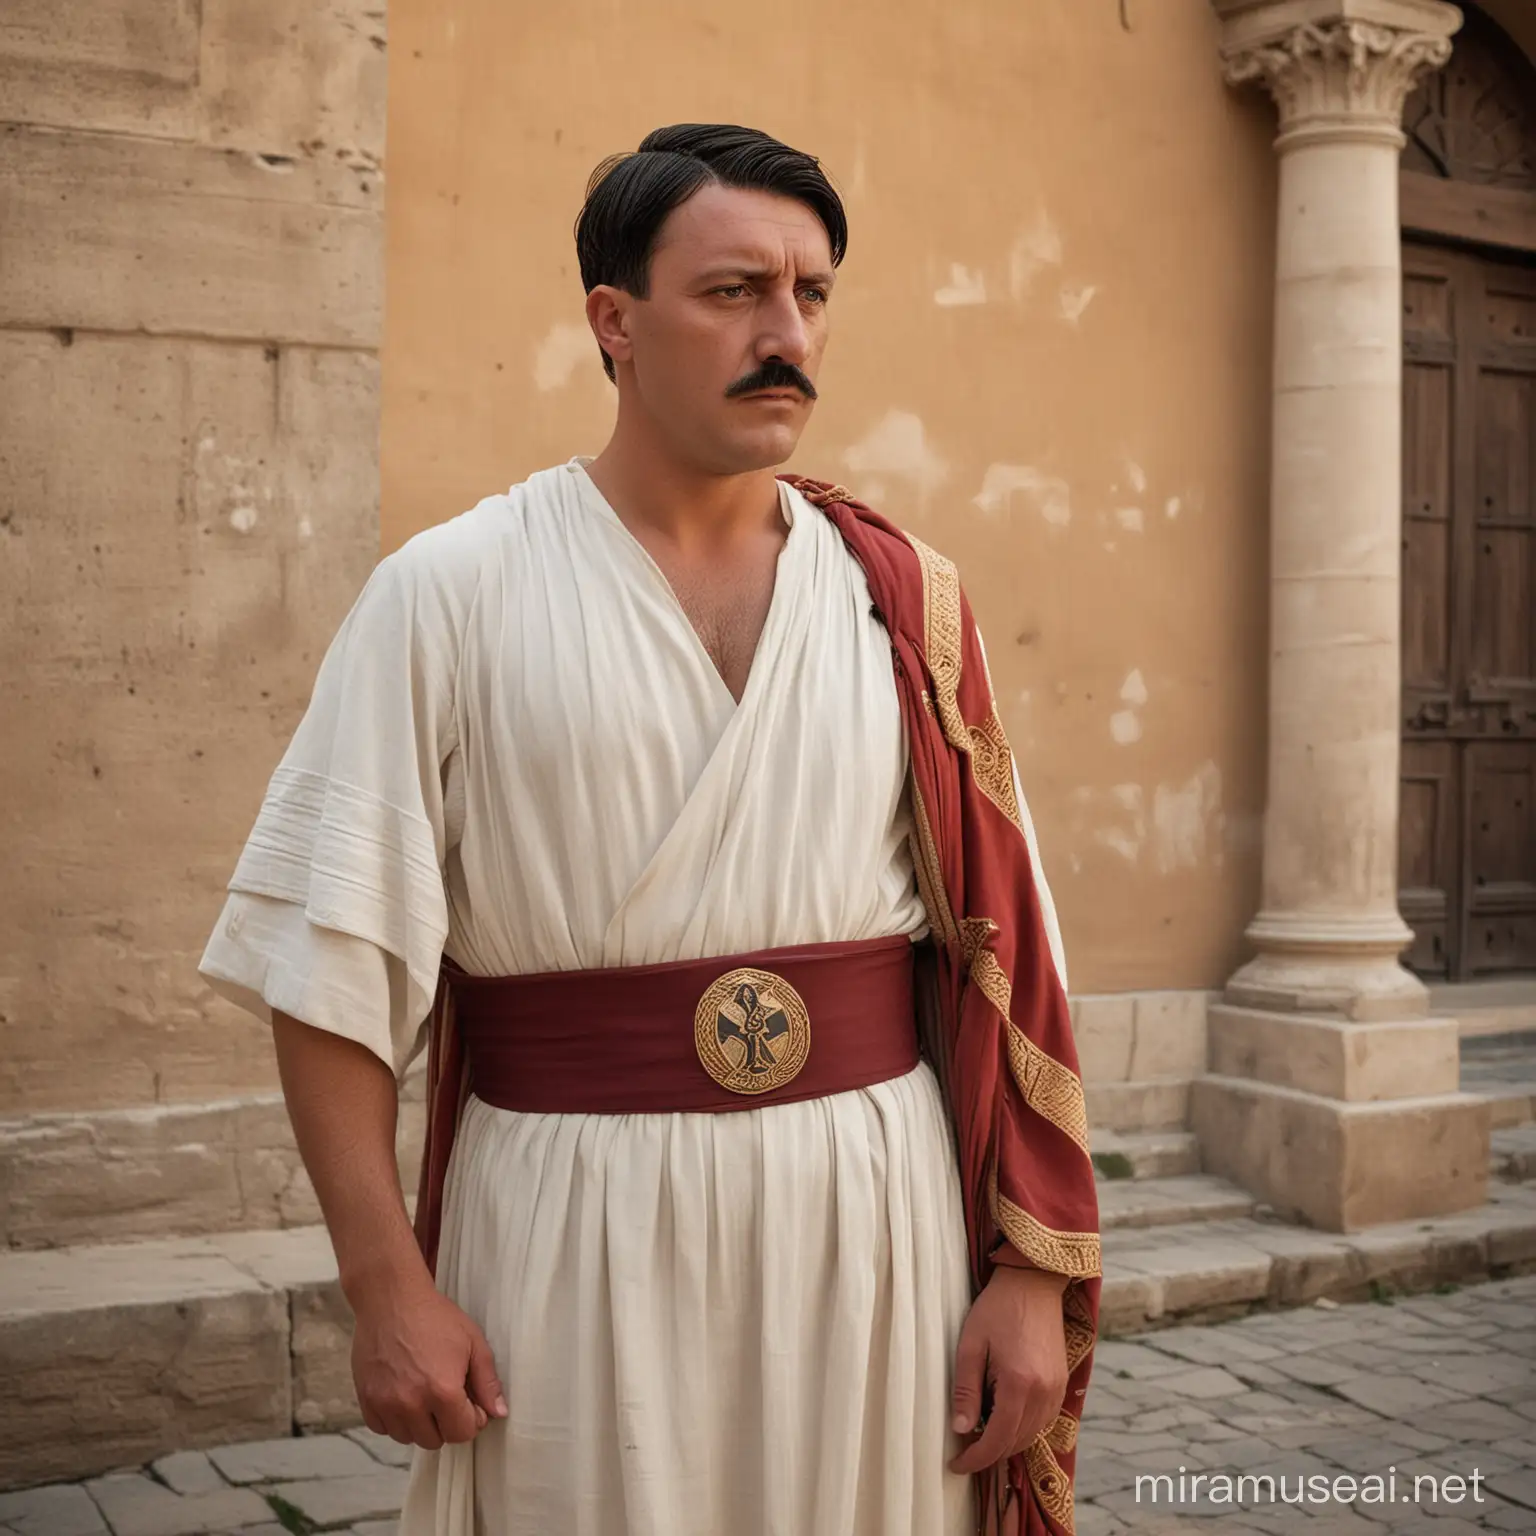 Photo medieval style: southern man around 30, dark hair, suntanned with a small Hitler beard, looks like Adolf Hitler. Dressed in an ancient Roman toga like a Roman senator, standing at a stand in a large medieval Mediterranean city, advertising the Senate election campaign and himself, Sigma 85mm f/1.4